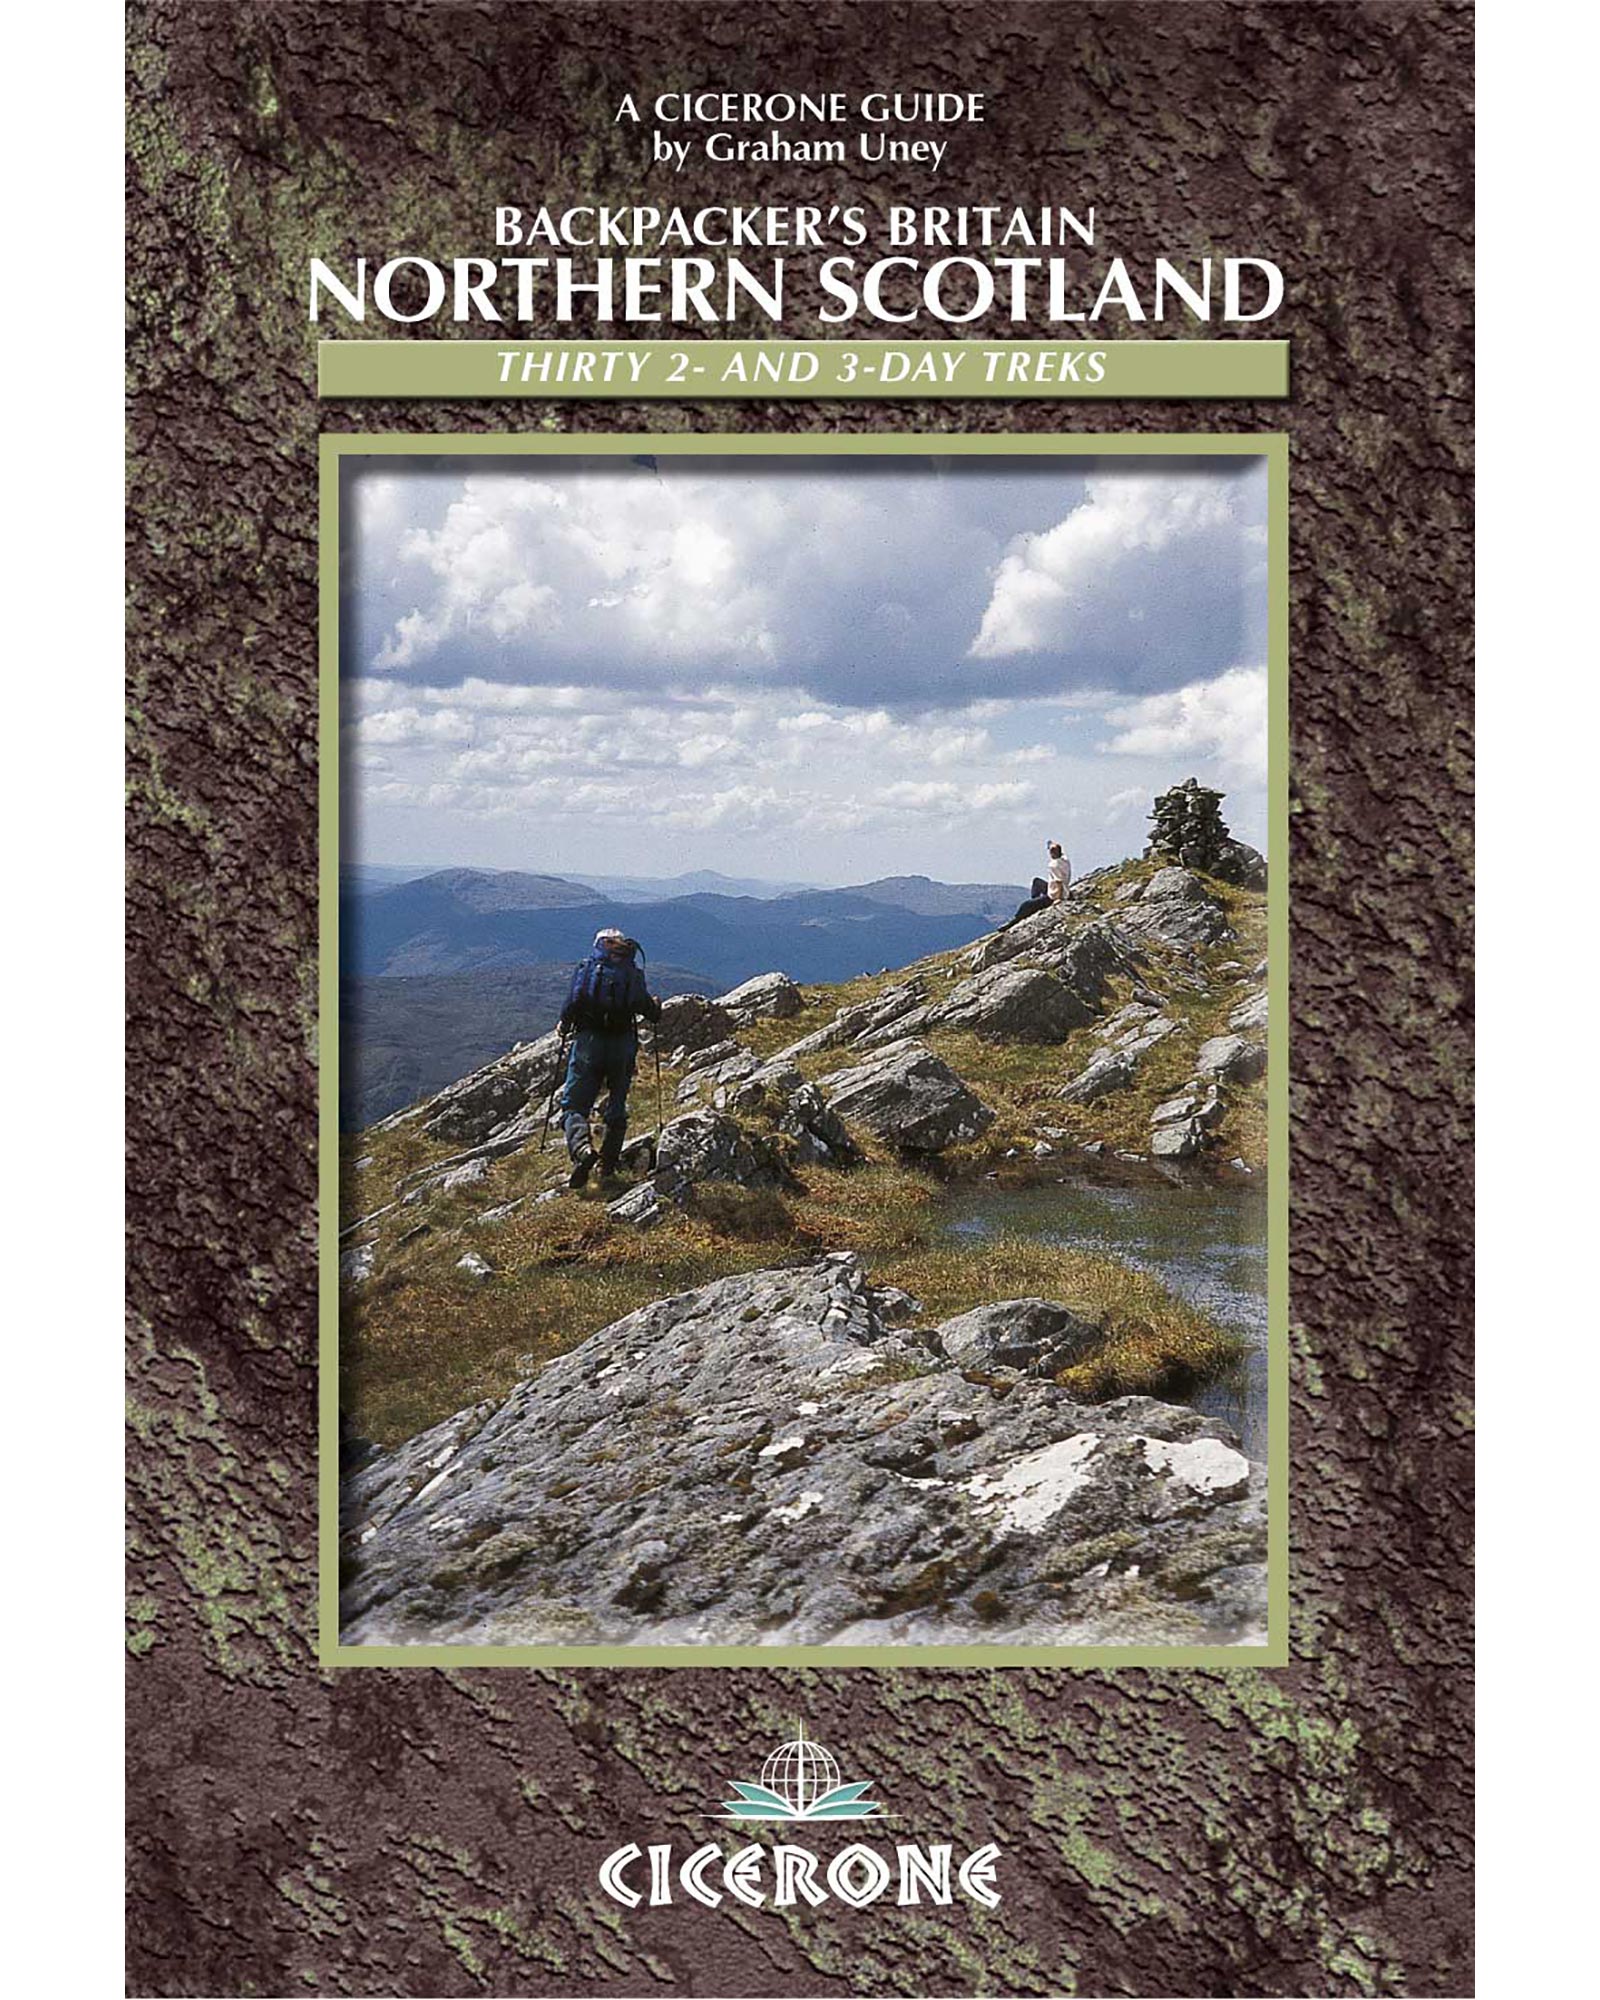 Cicerone Backpacker’s Britain Northern Scotland Guide Book